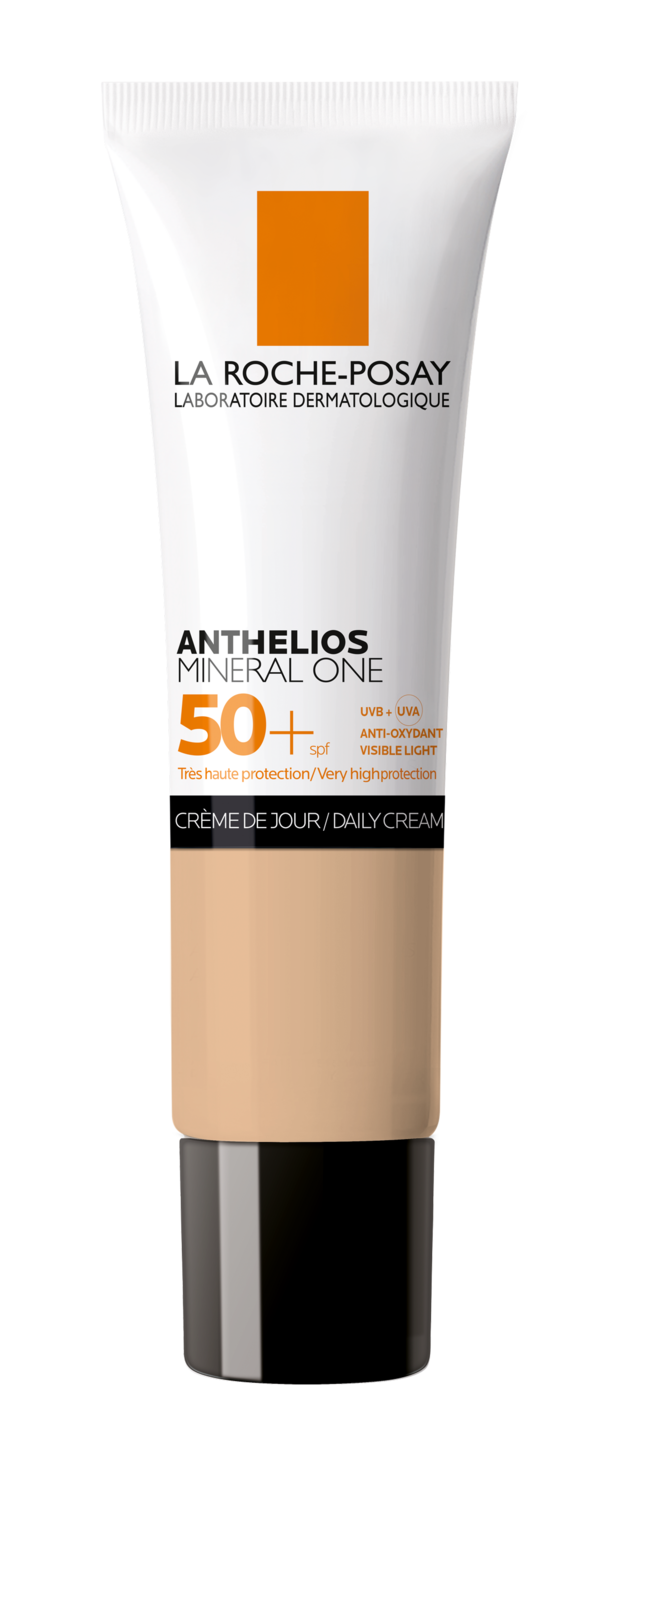 Image of La Roche-Posay Anthelios Mineral One SPF50 - Kleur 02 